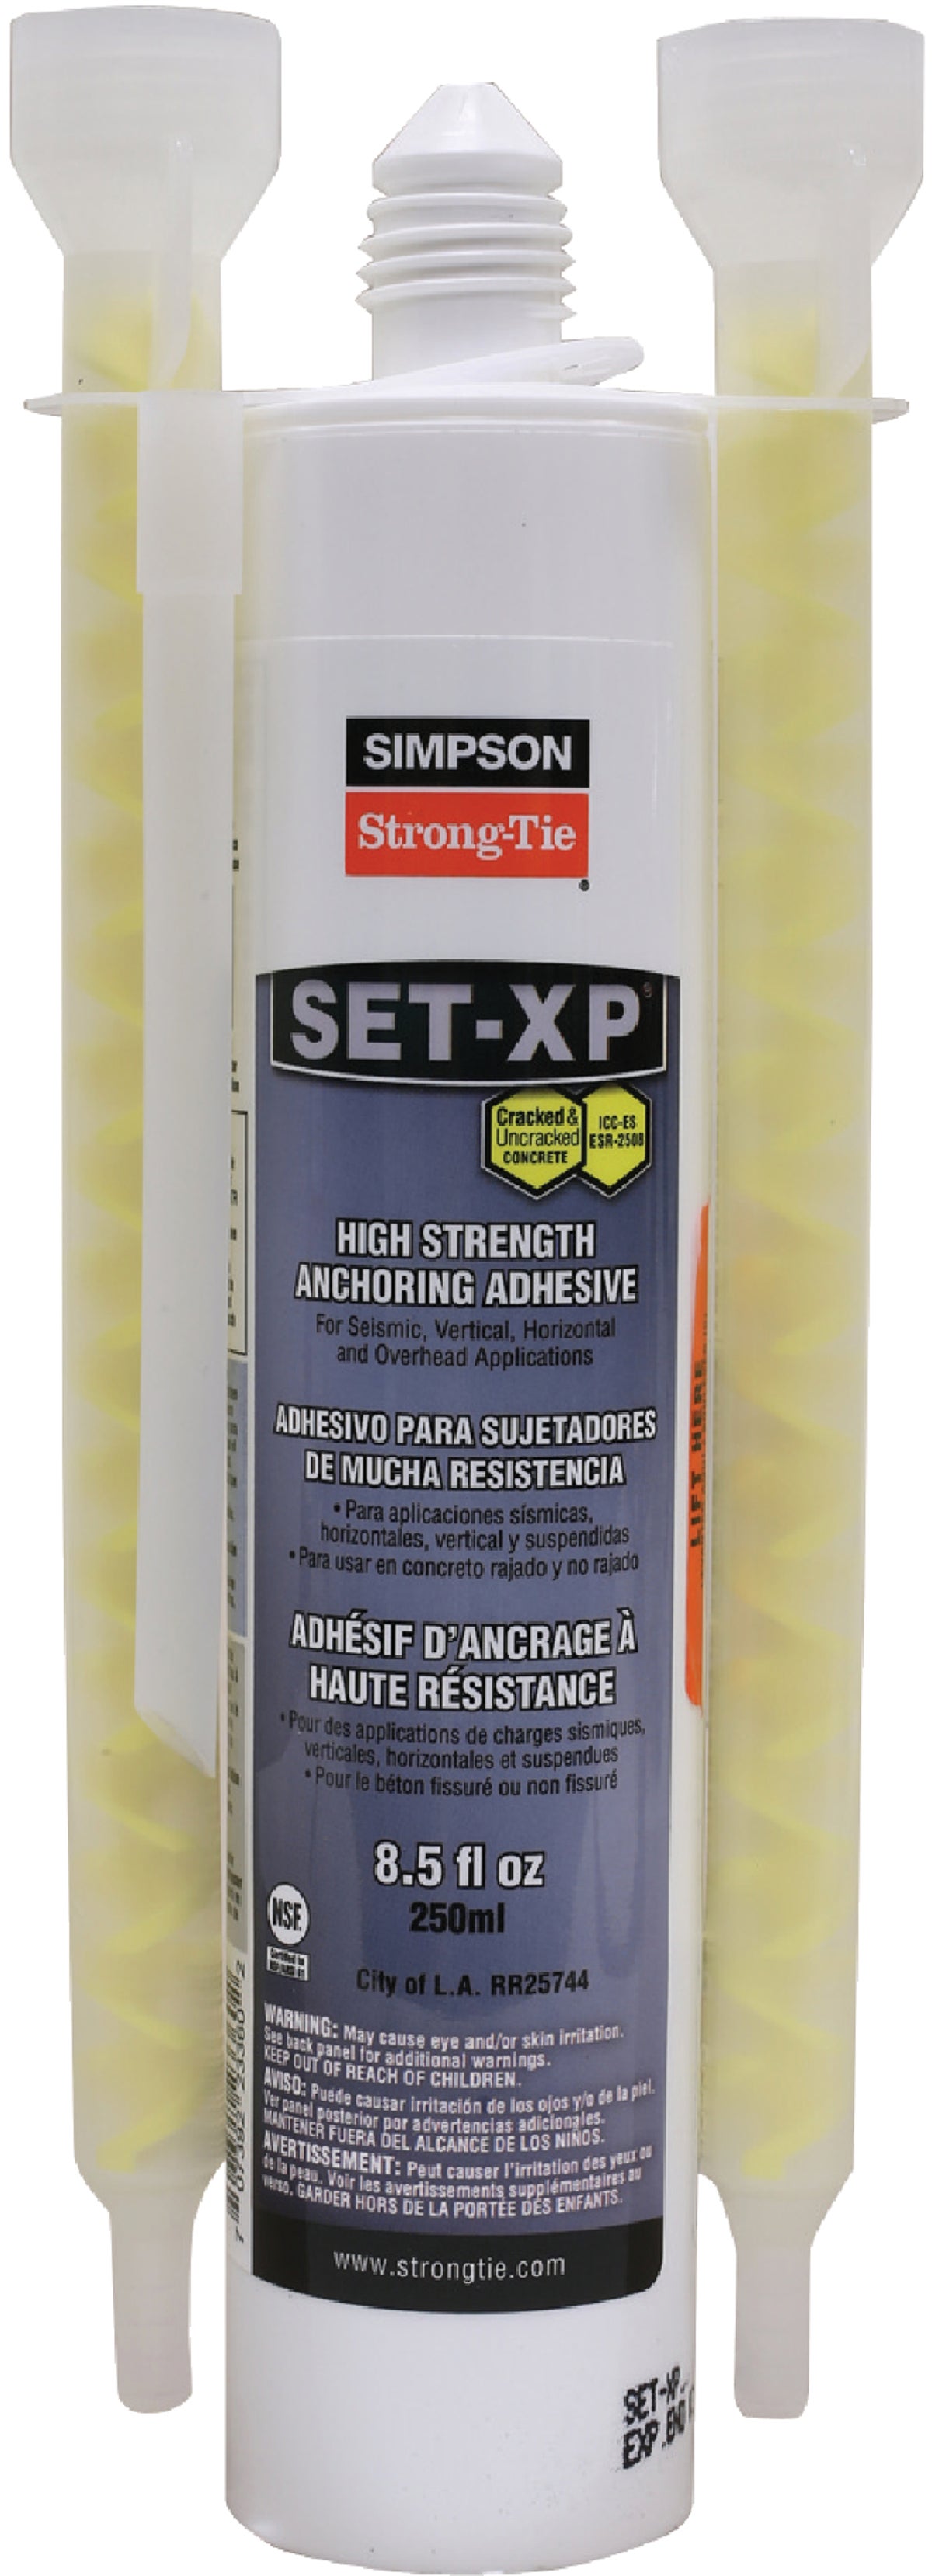 Simpson Strong-Tie Adhesives & Glues in Paint Supplies & Tools 